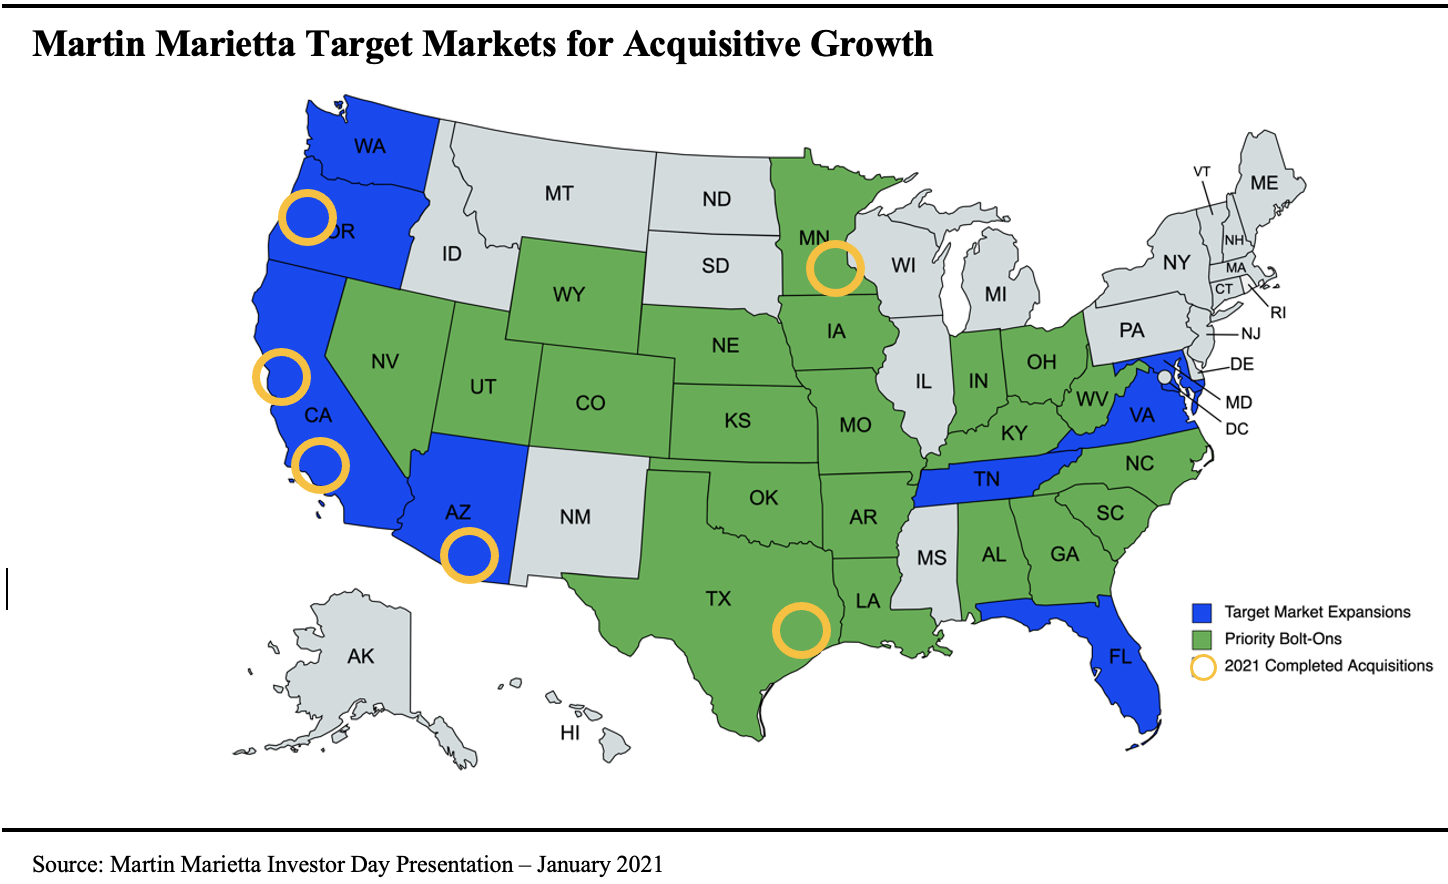 Graphic displaying Martin-Marietta's target market expansions and priority bolt-ons